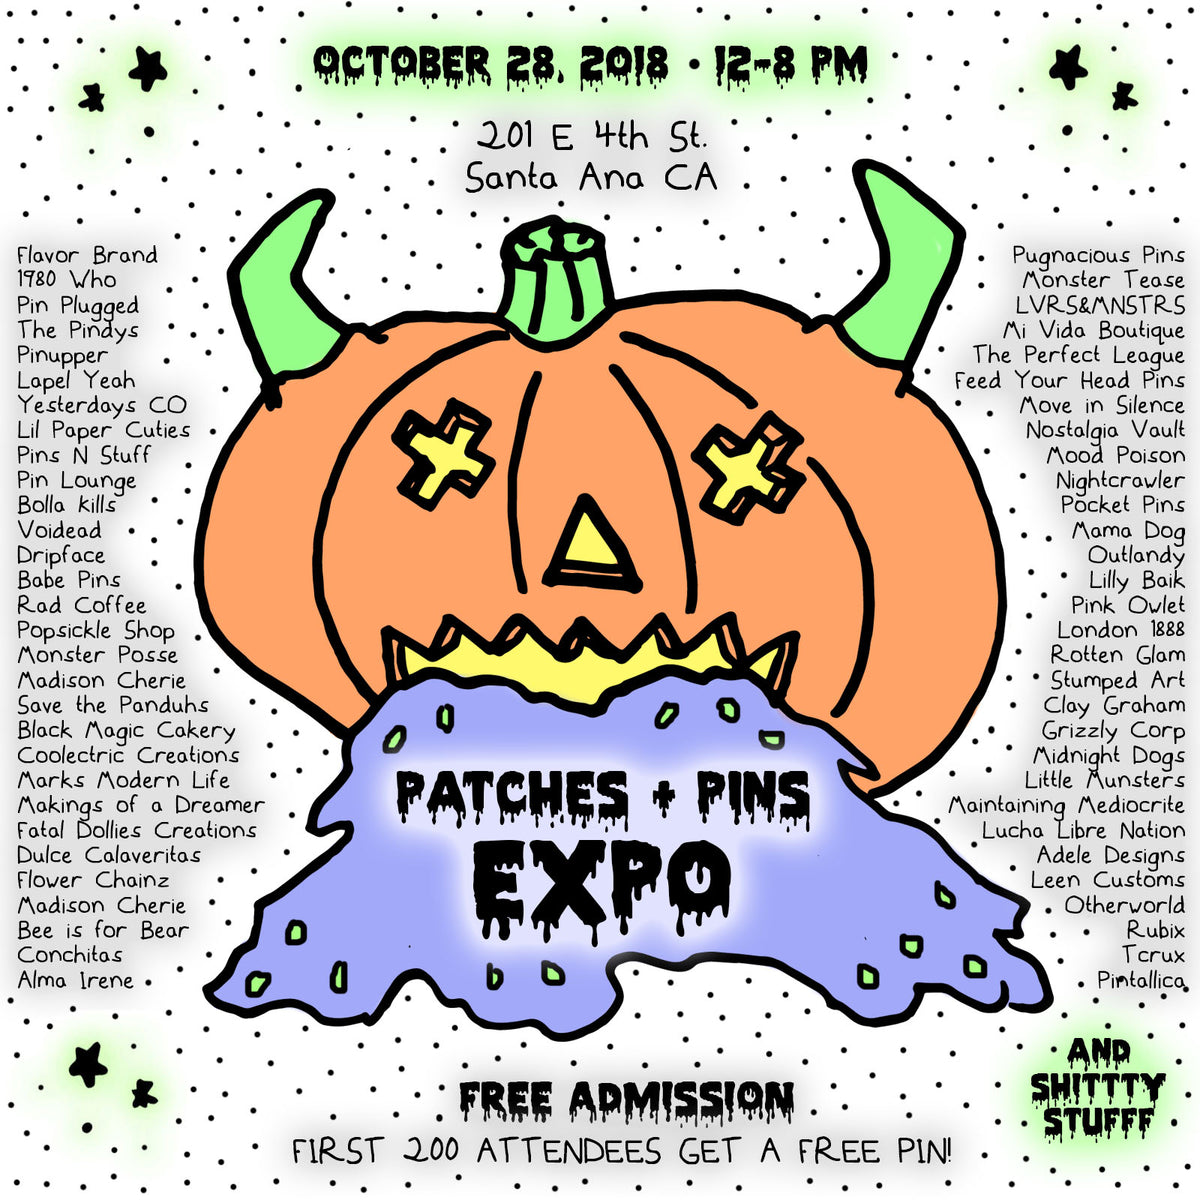 OCTOBER 18, 2018 // PATCHES & PINS EXPO